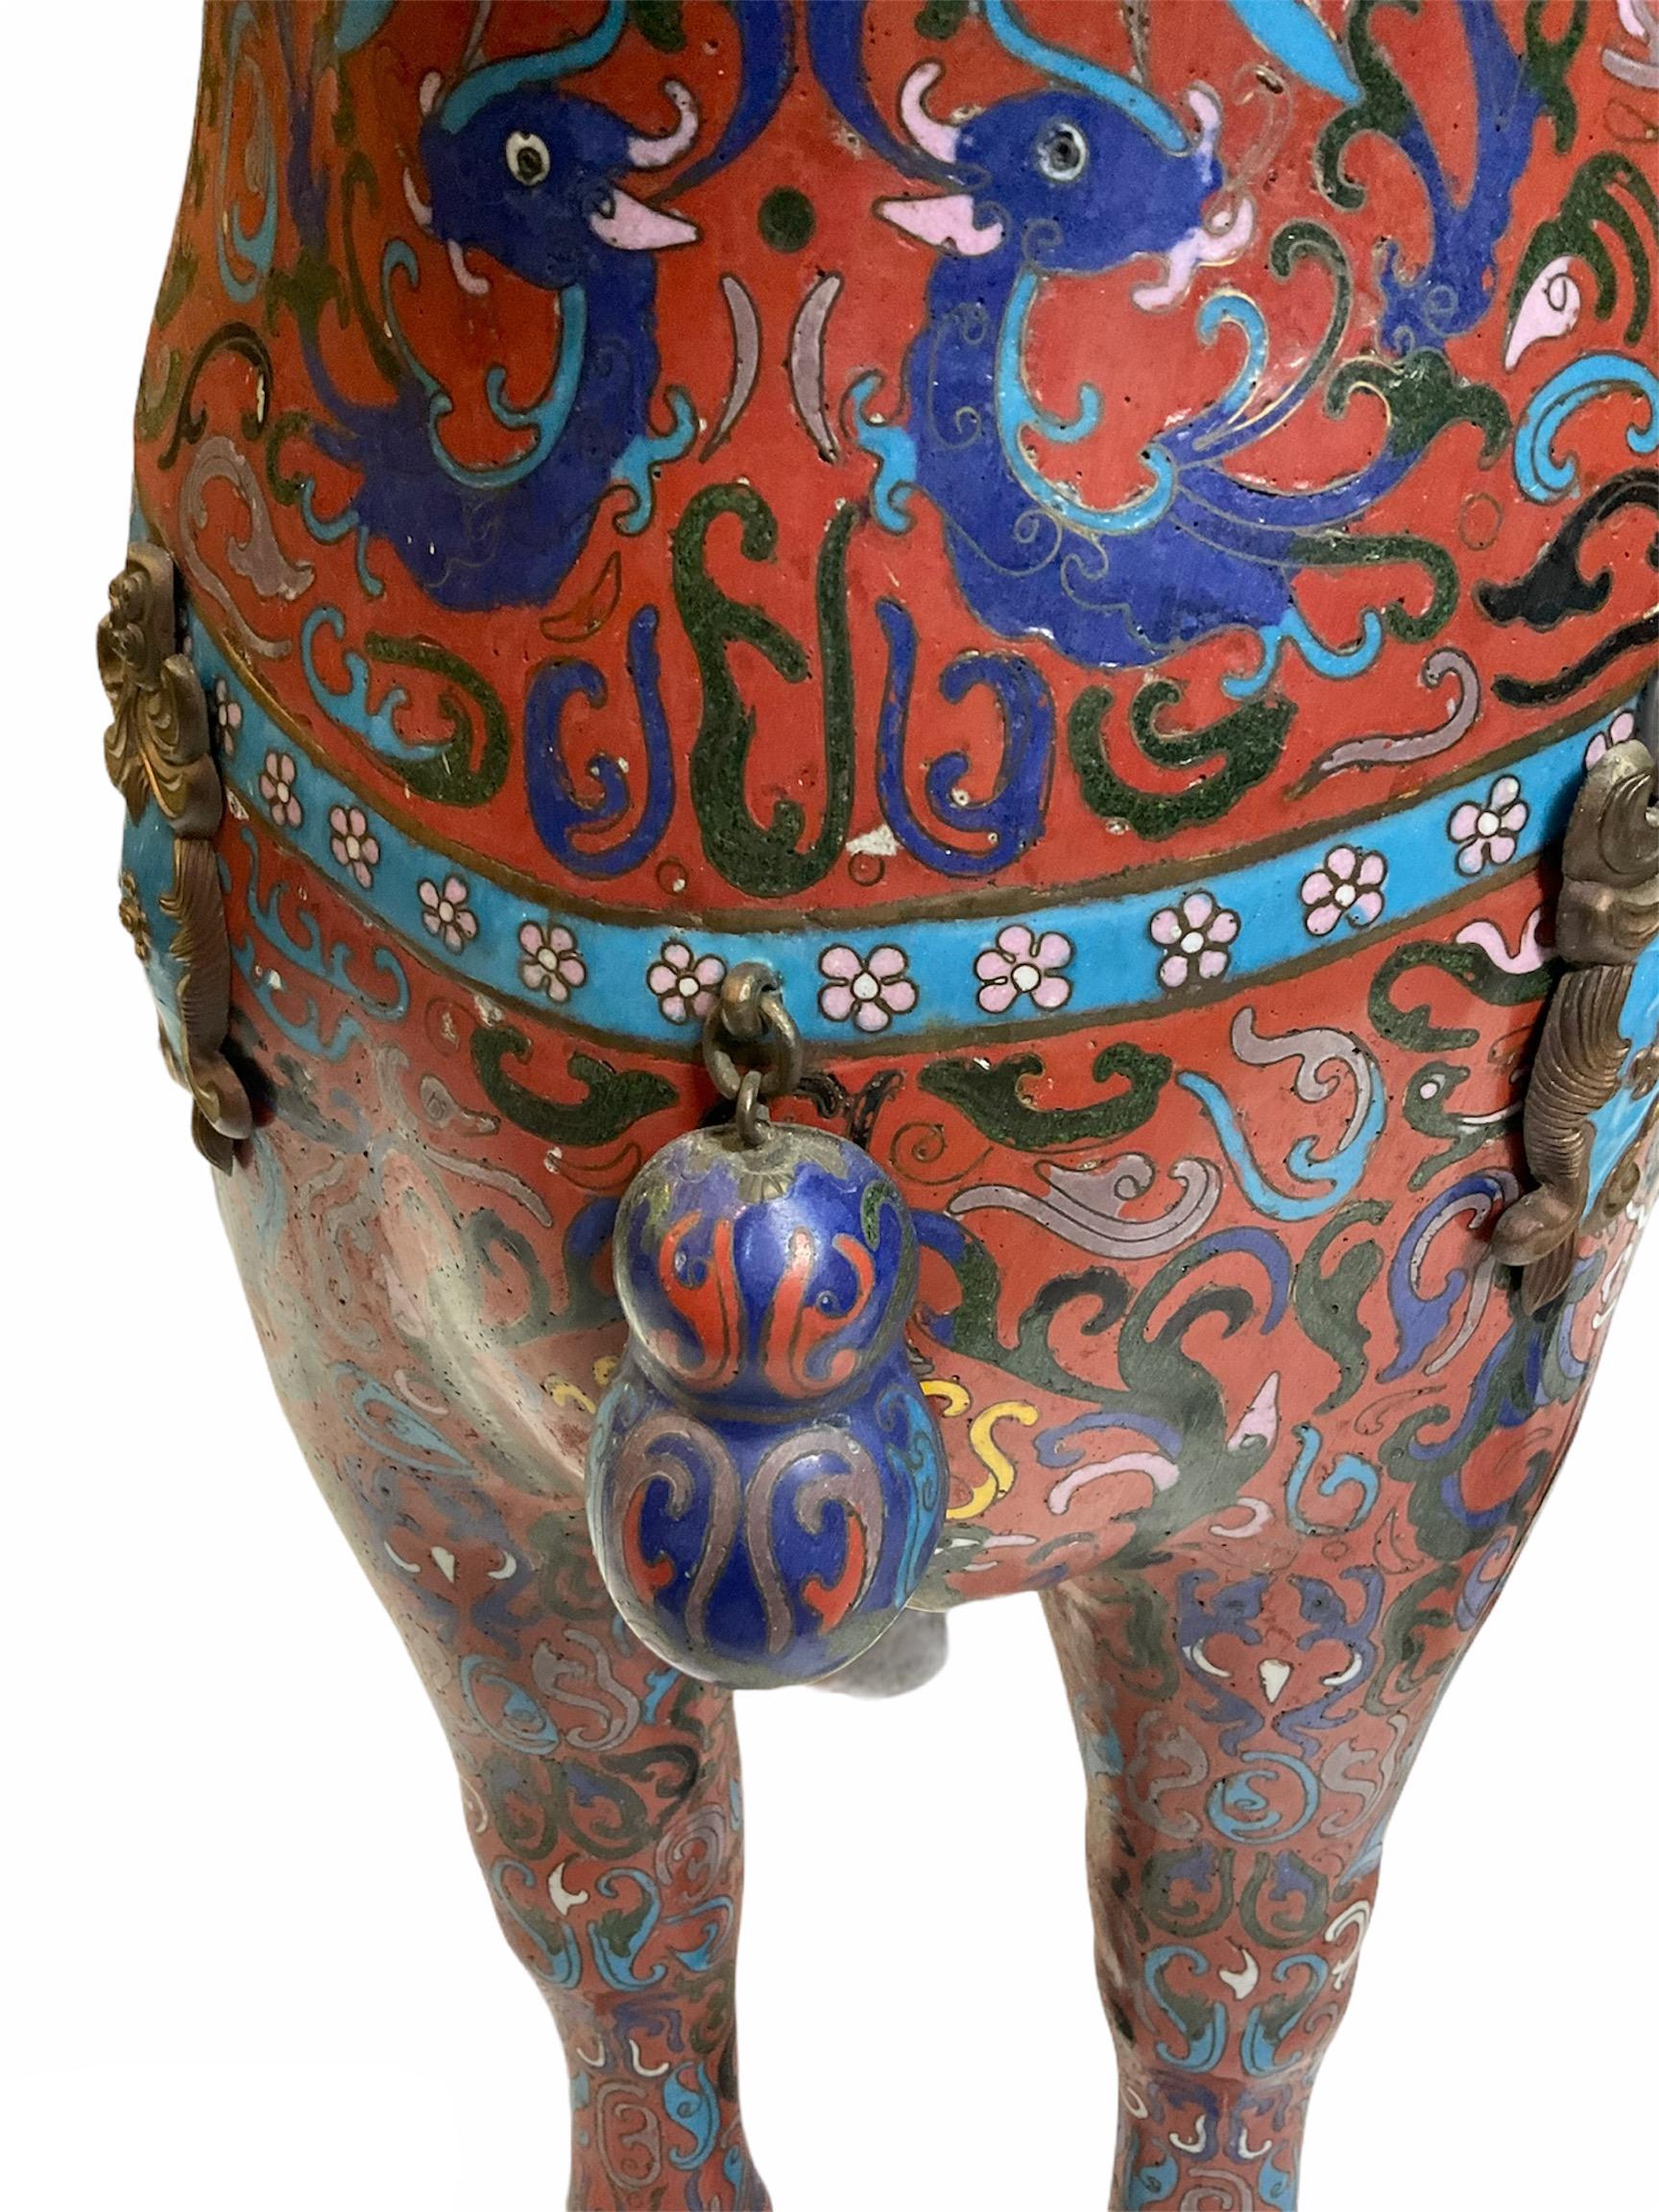 This is a pair of Chinese enamel cloisonné brass standing up horses. Their background is red wine color decorated with a mix of polychromatic scrolls, shields, seahorses and dragons. They are also embellished with a turquoise belts with flowers that